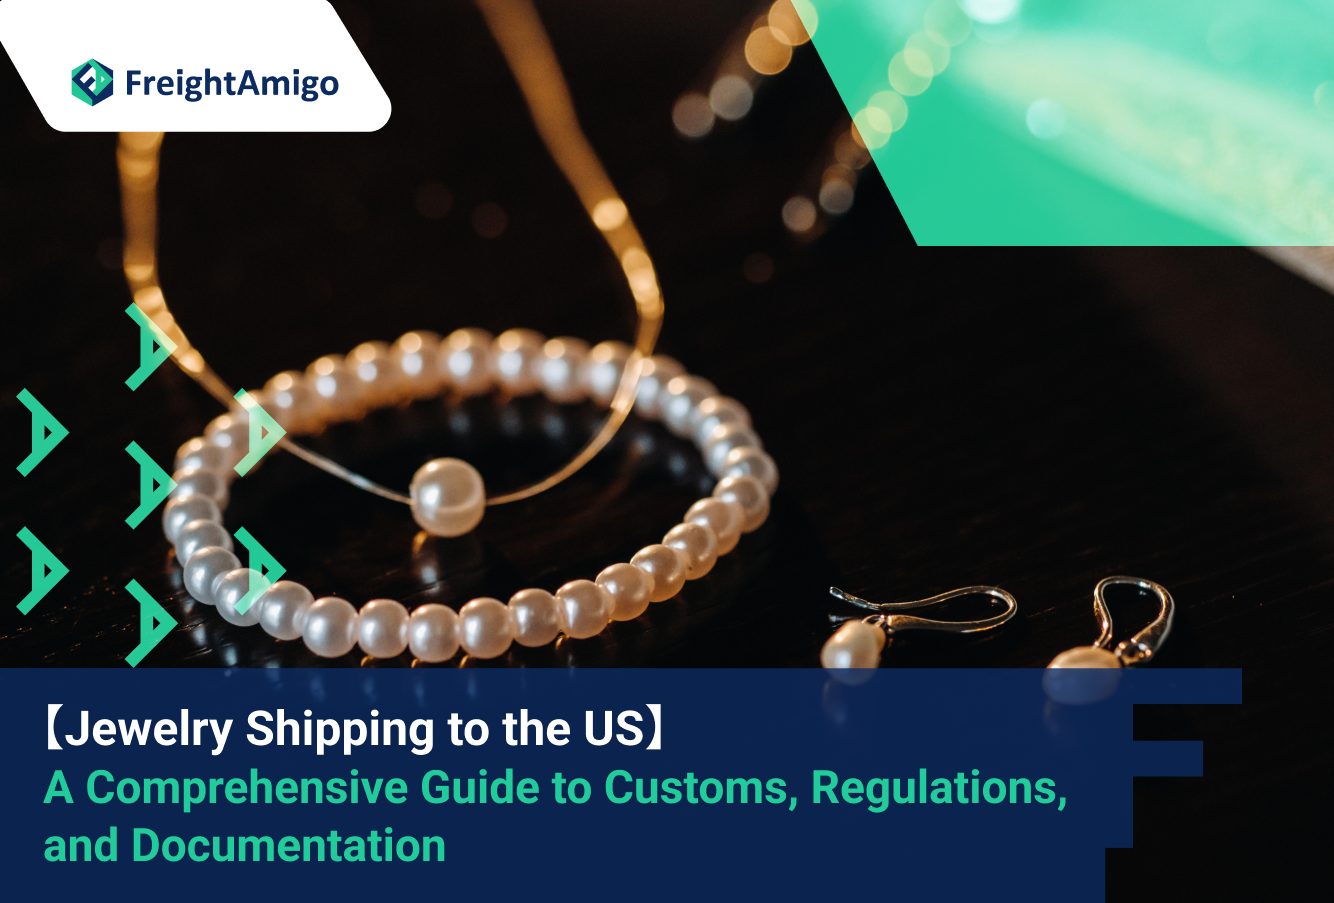 Jewelry Shipping to the US: A Comprehensive Guide to Customs, Regulations, and Documentation